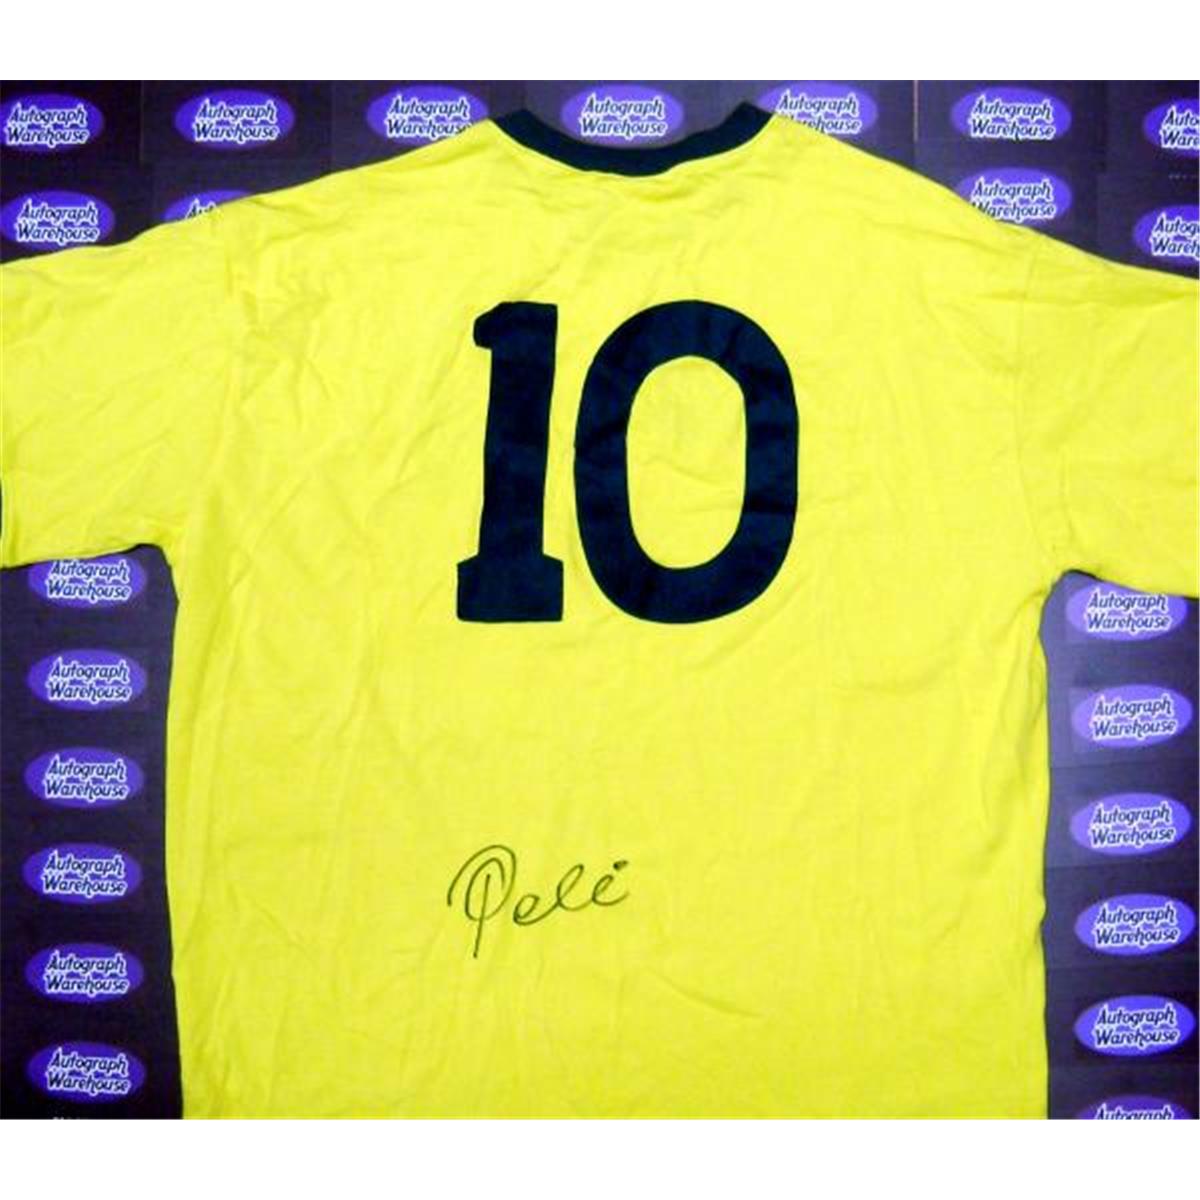 Picture of Autograph Warehouse 726157 Pele Autographed Soccer Brazil Signed Back Below No.10 -1 Jersey, 2XL